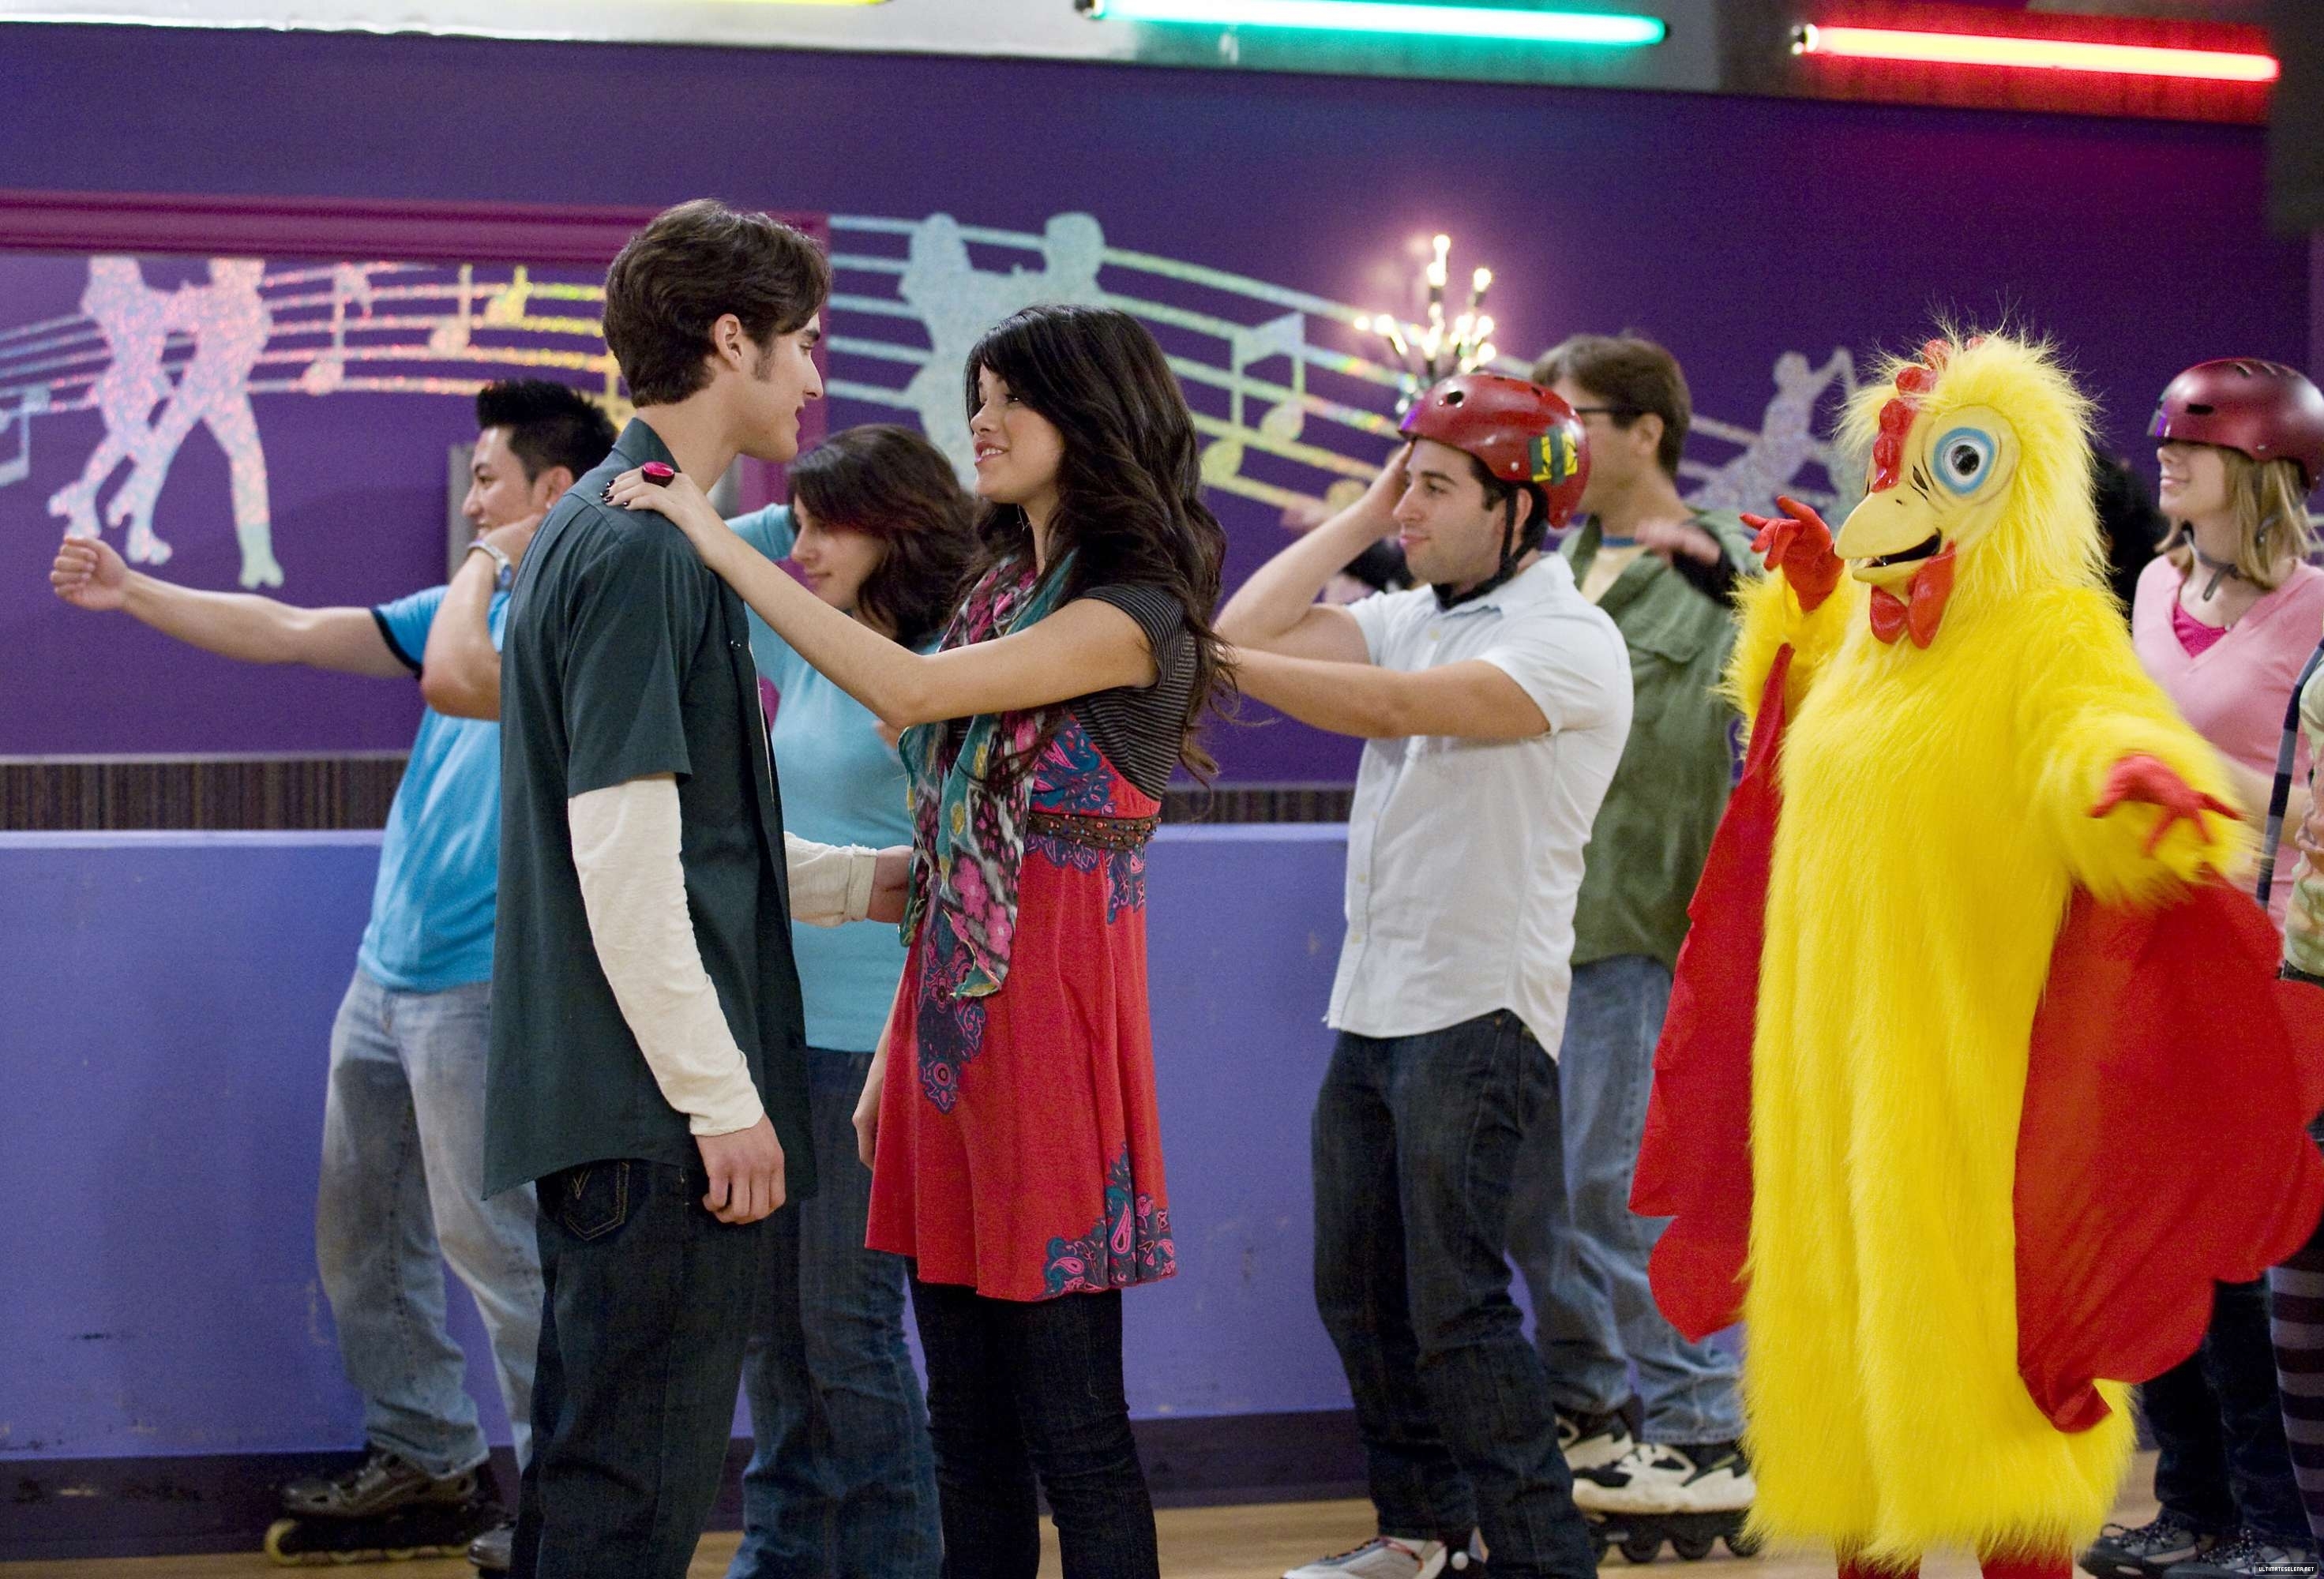 Wizards of Waverly Place. 